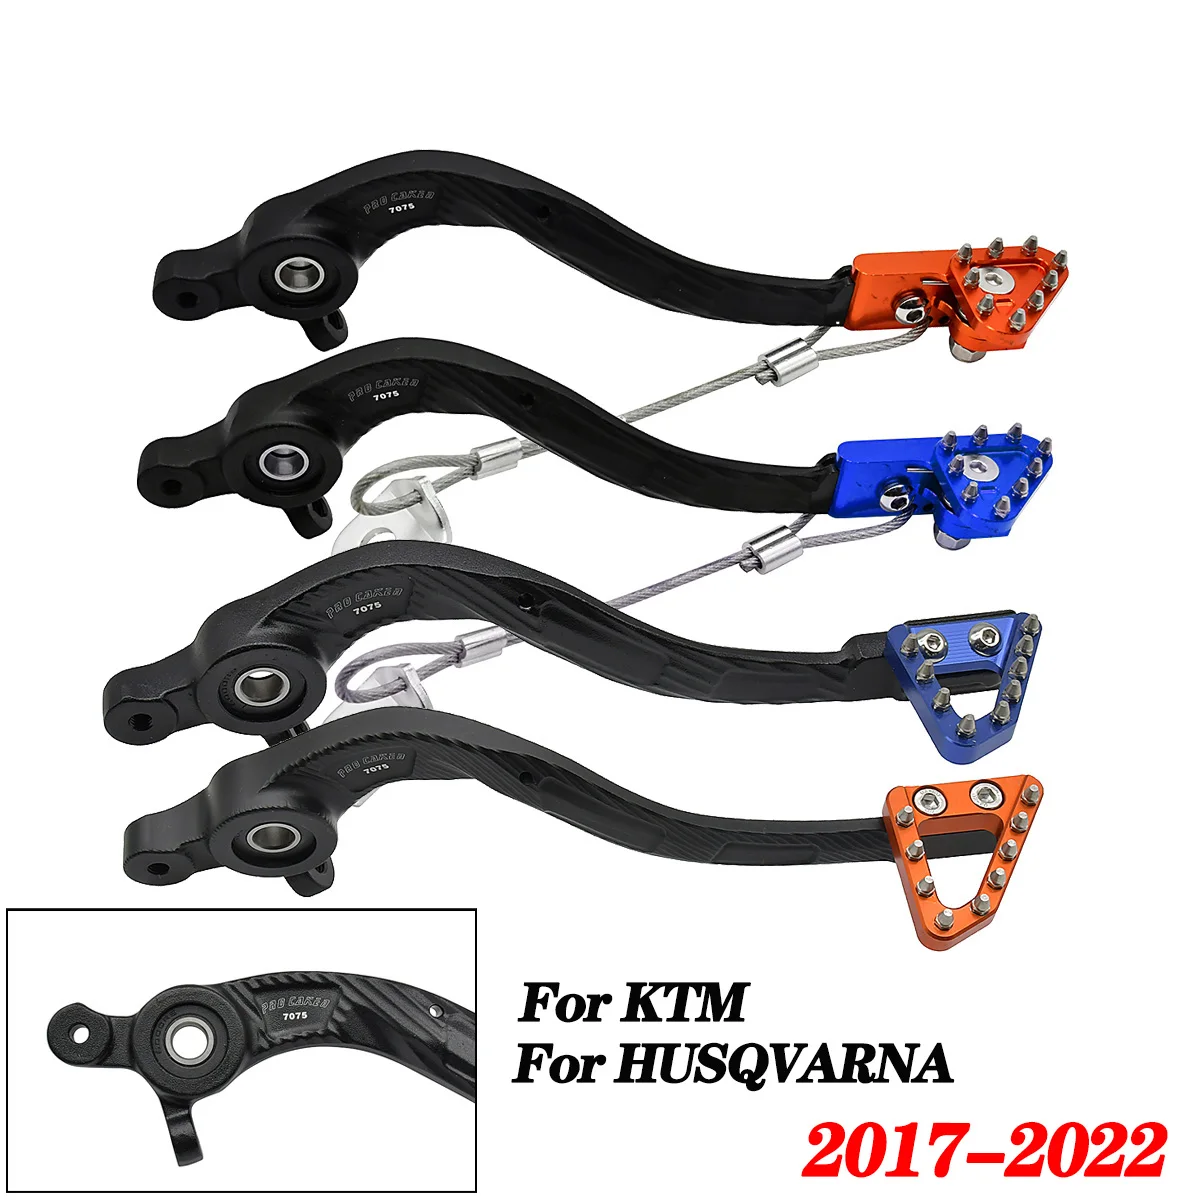 

Motorcycle CNC Rear Foot Brake Lever Pedal For KTM SX XC XCW EXC EXCF For Husqvarna TC TE TX FE 125-500cc 2017 2018 2019-2022